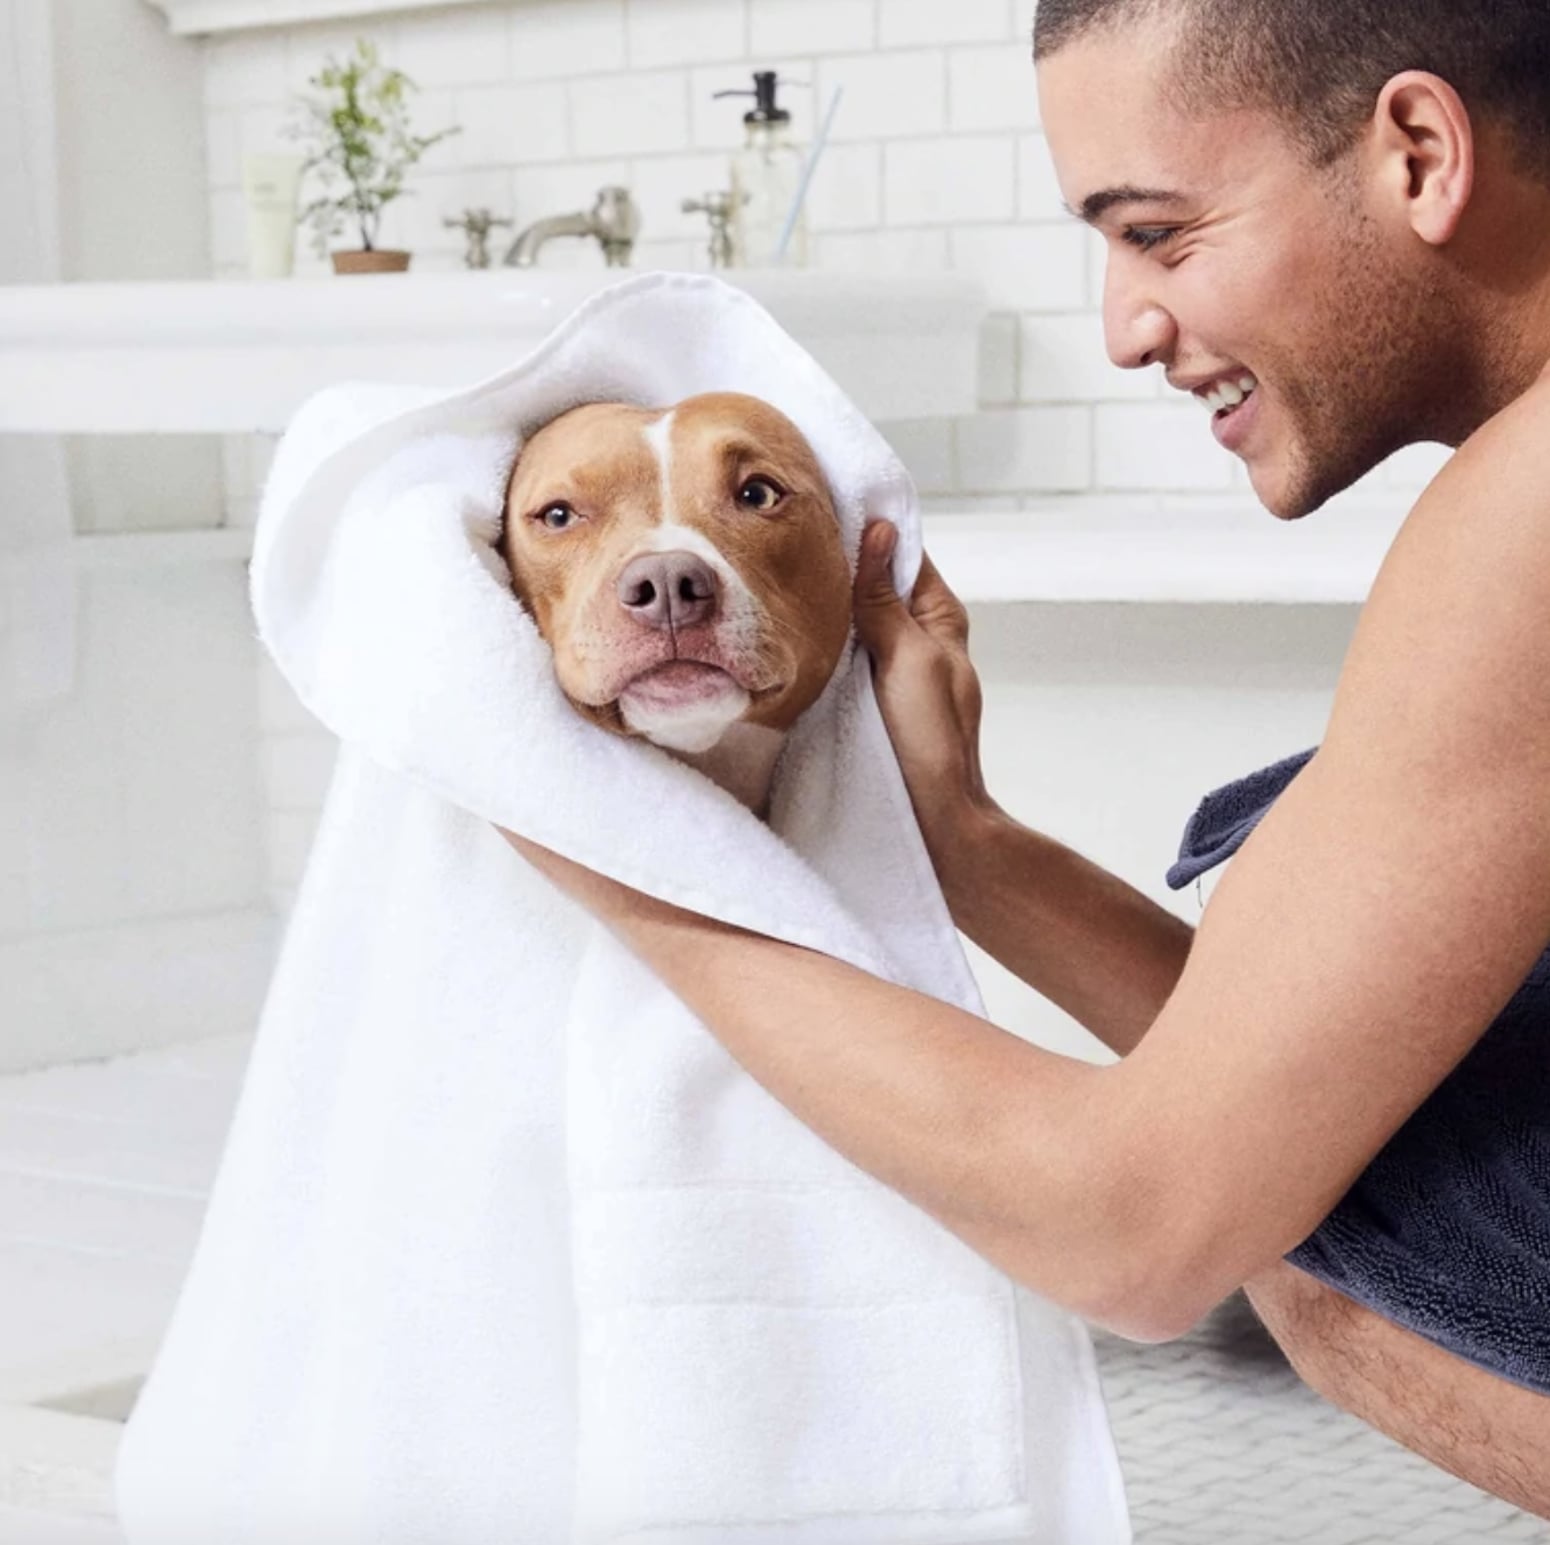 Weezie Towels: Soft, Luxurious & Super Absorbent